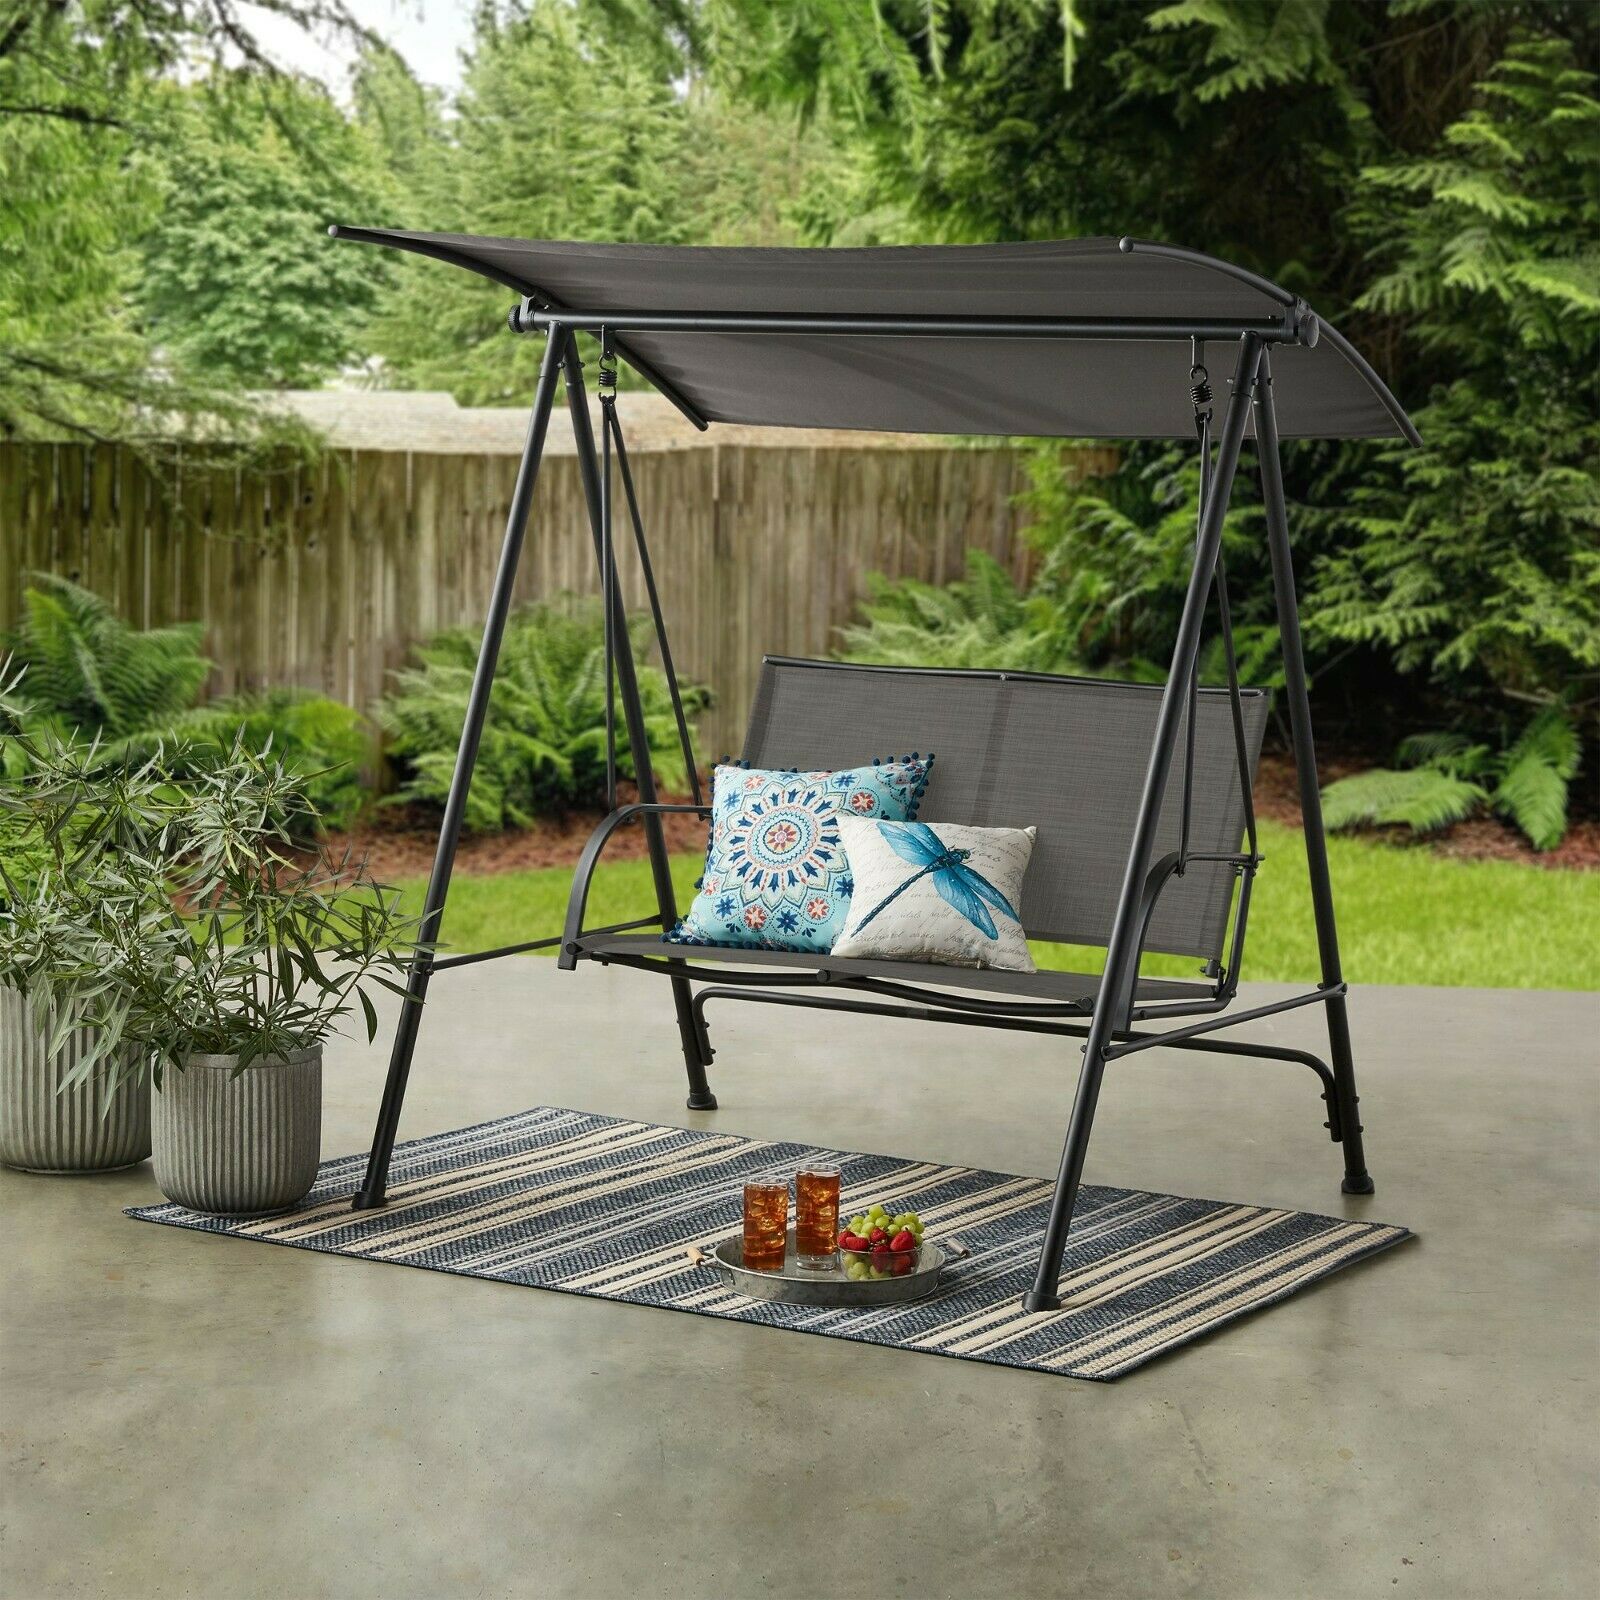 2-Person Canopy Porch Swing Seat Outdoor Patio Steel Conversation Furniture Gray